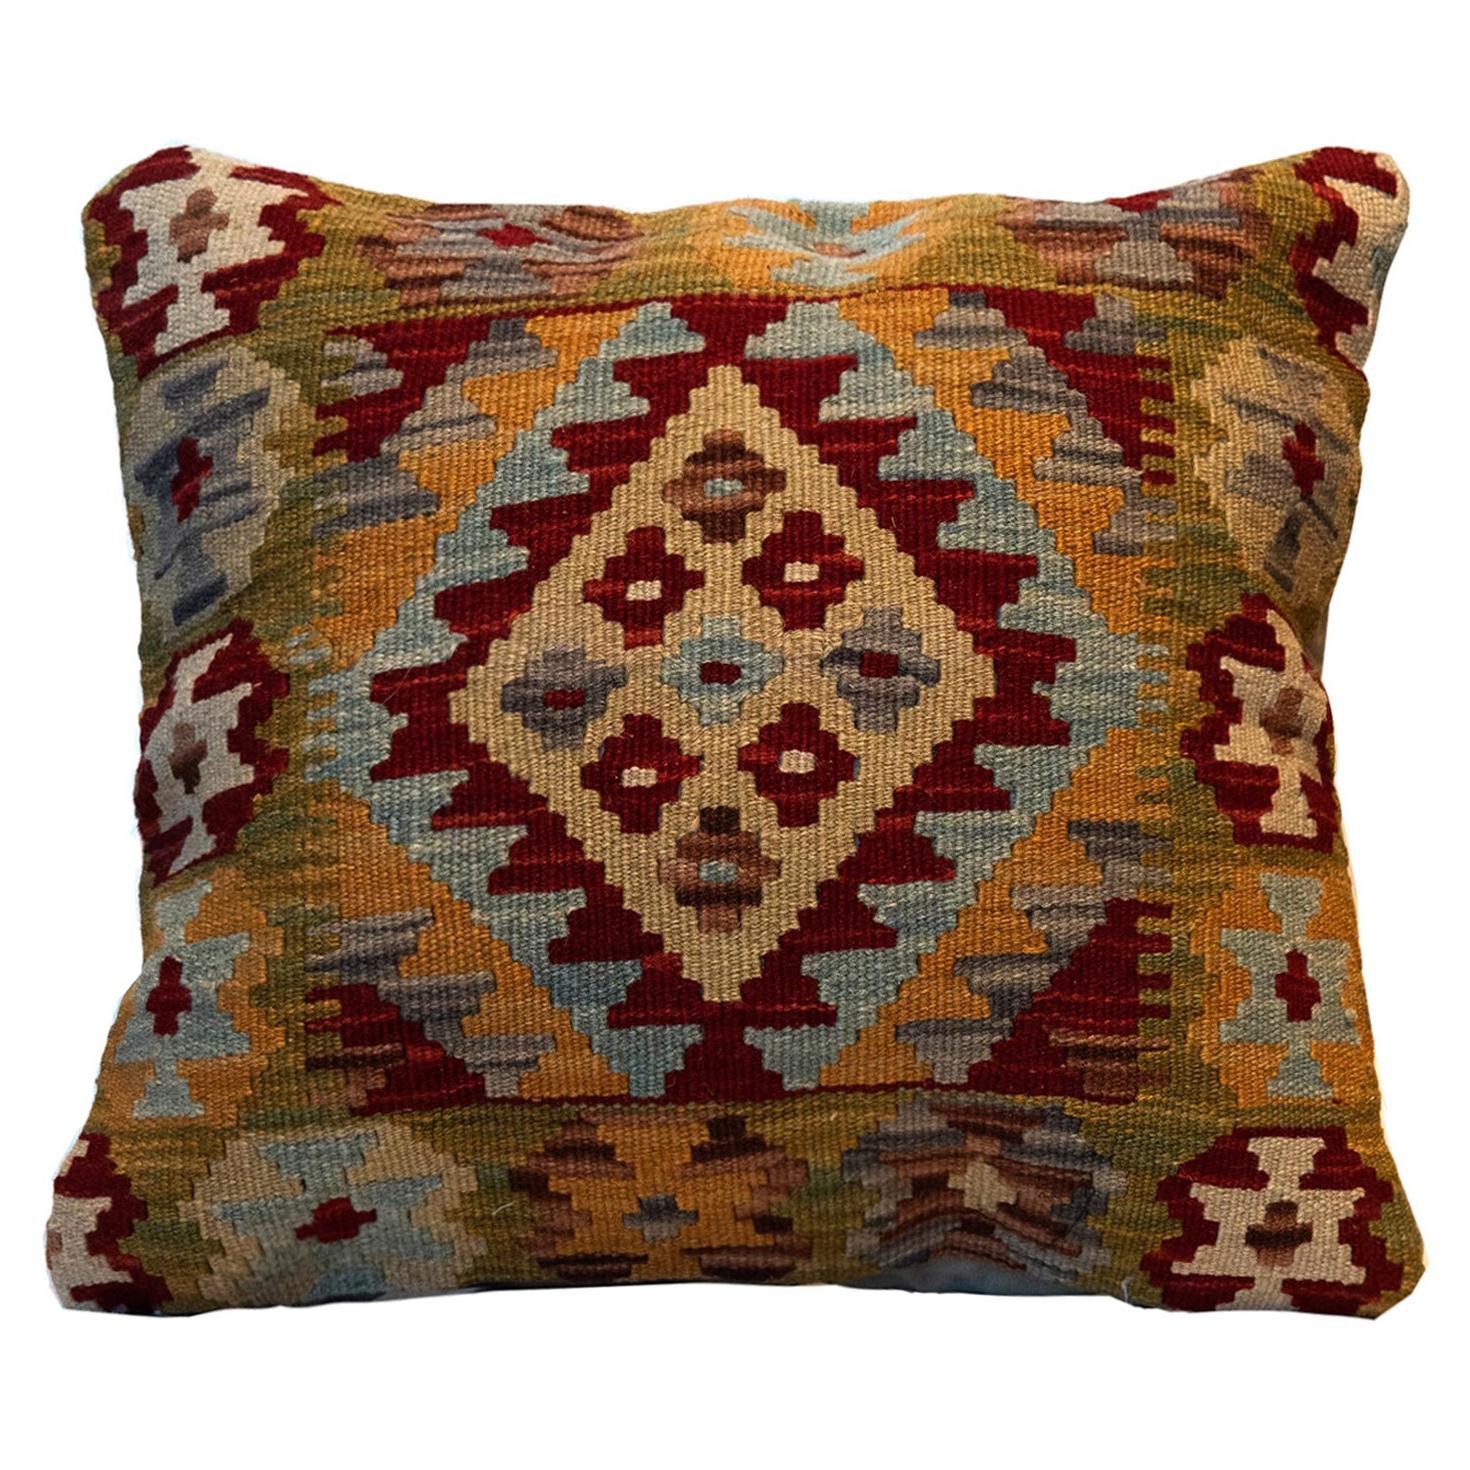 Afghan Kilim Cushion Cover Handwoven Wool Scatter Pillow Case